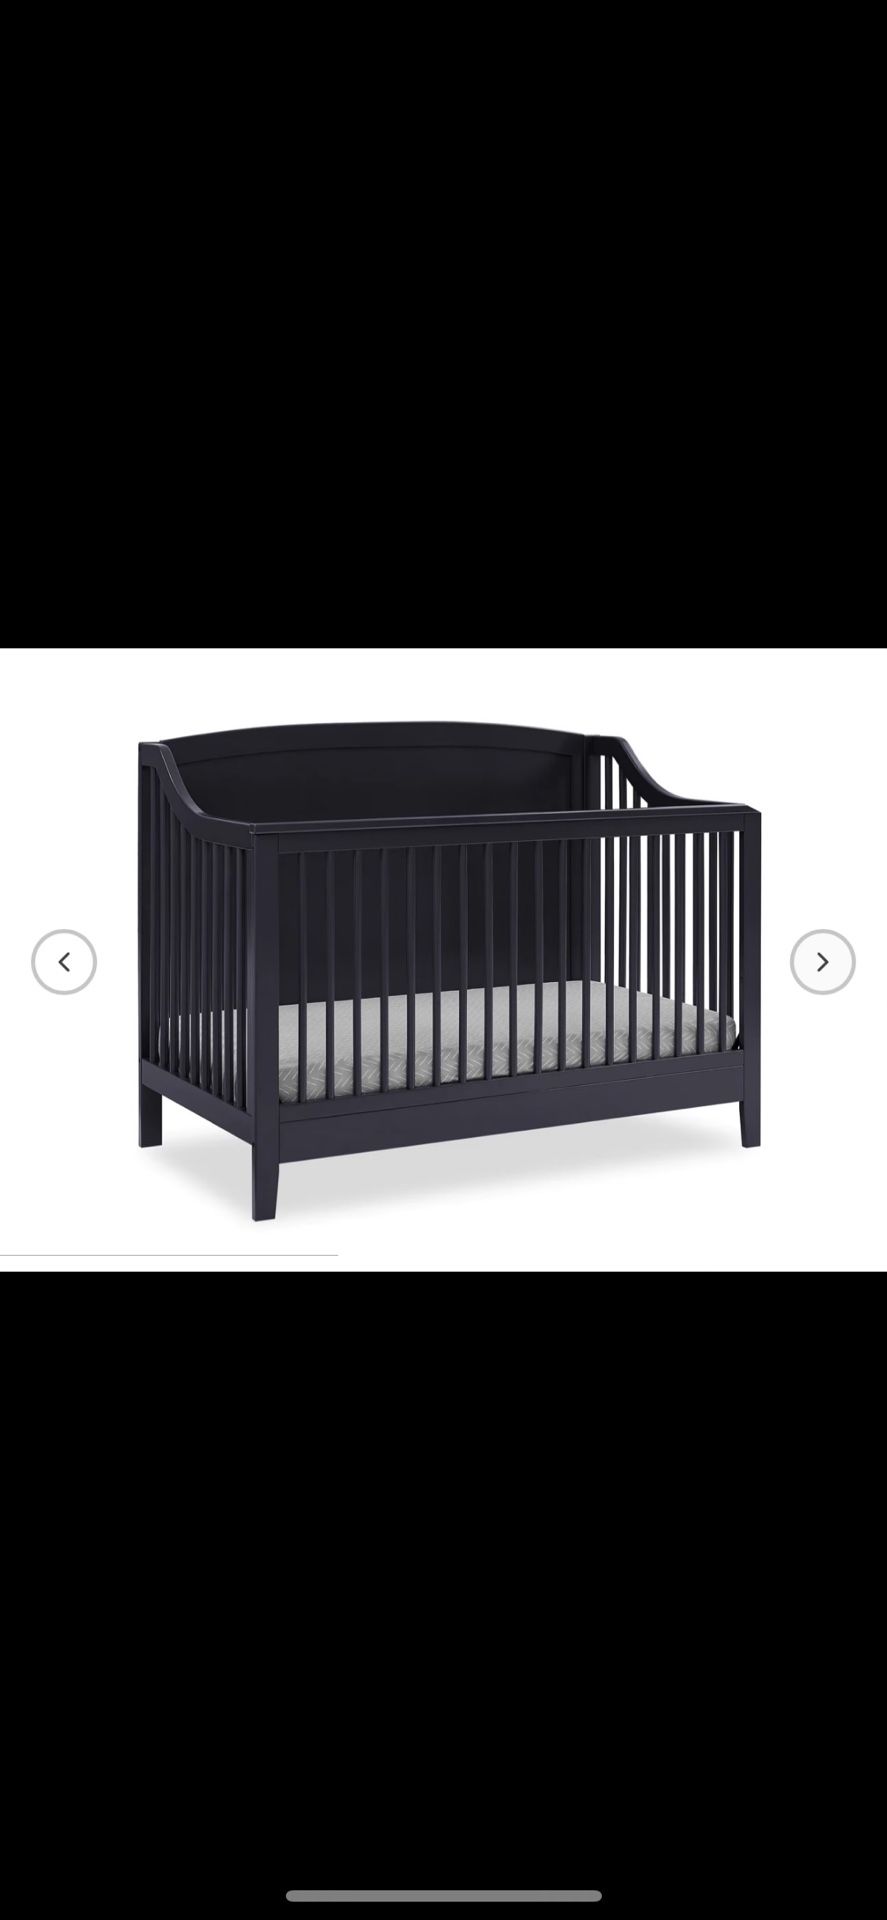 Campbell 6 In 1 Convertible Crib/ Baby/ Toddler/ Nursery/ Bed/ Furniture/ Bedroom/ Sleep/ New